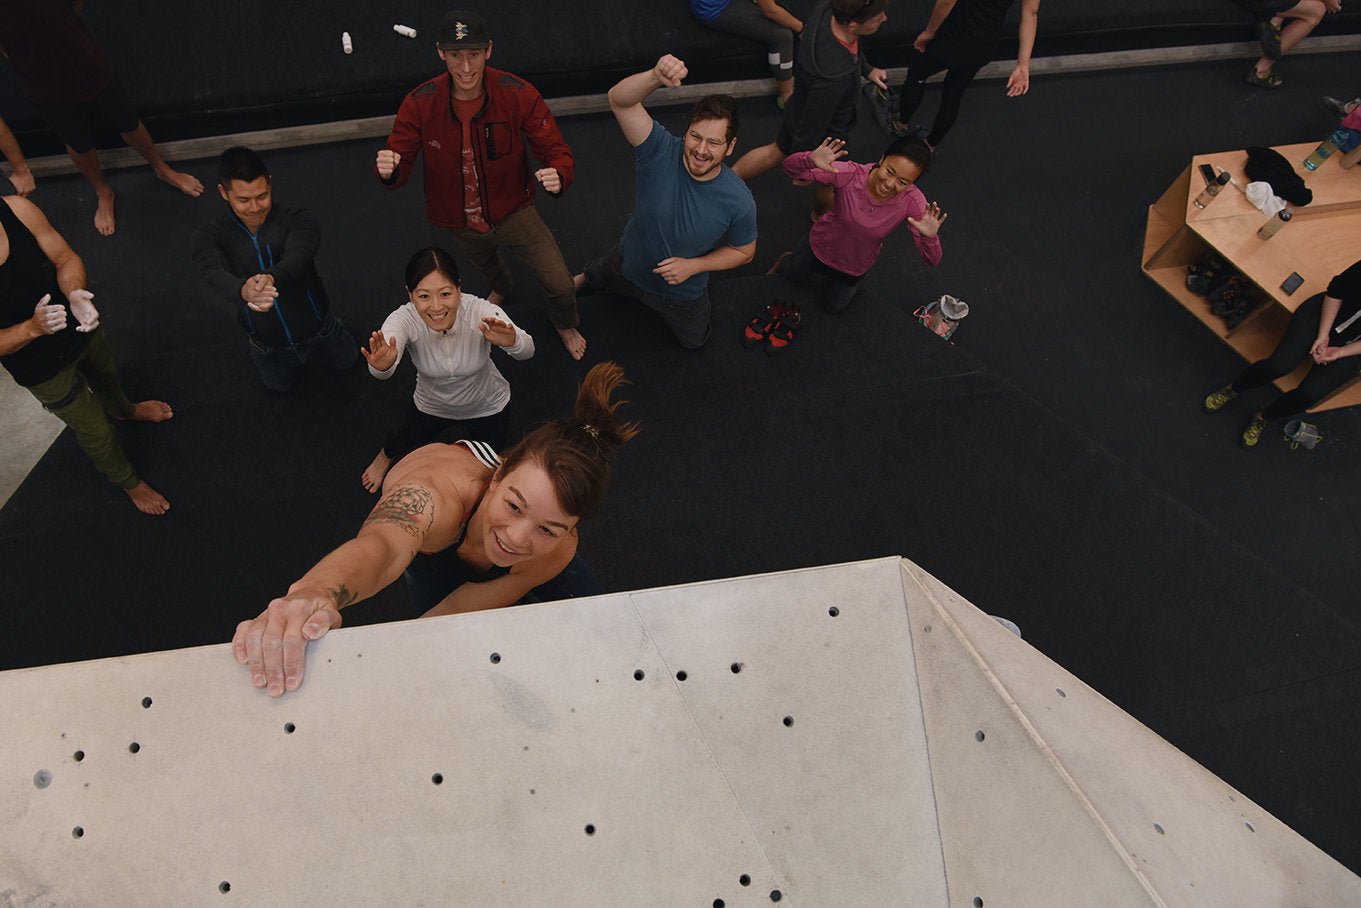 Stef Kujawa toping out on a bouldering route at Urban Climb Collingwood